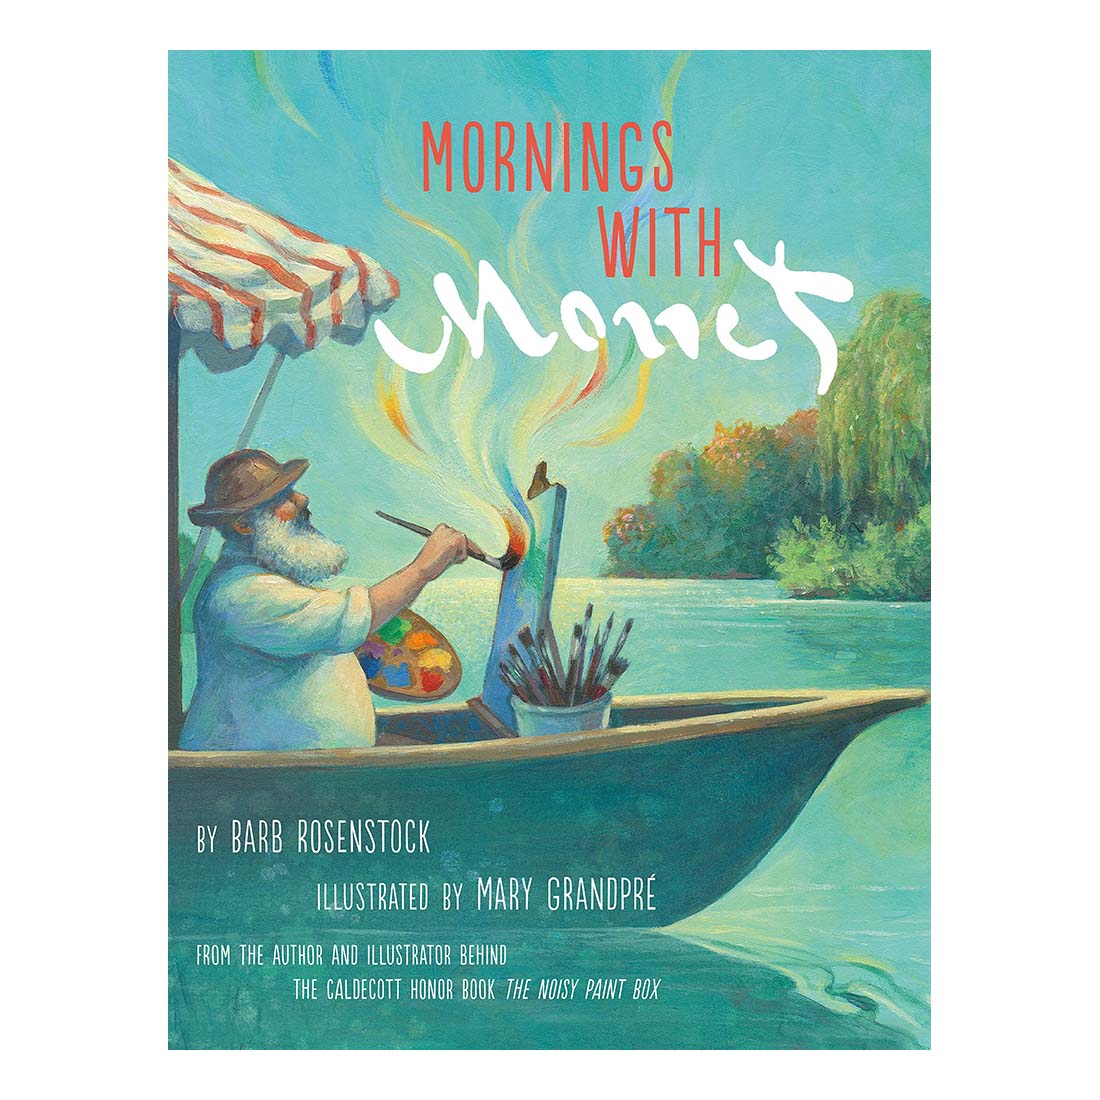 Mornings with Monet